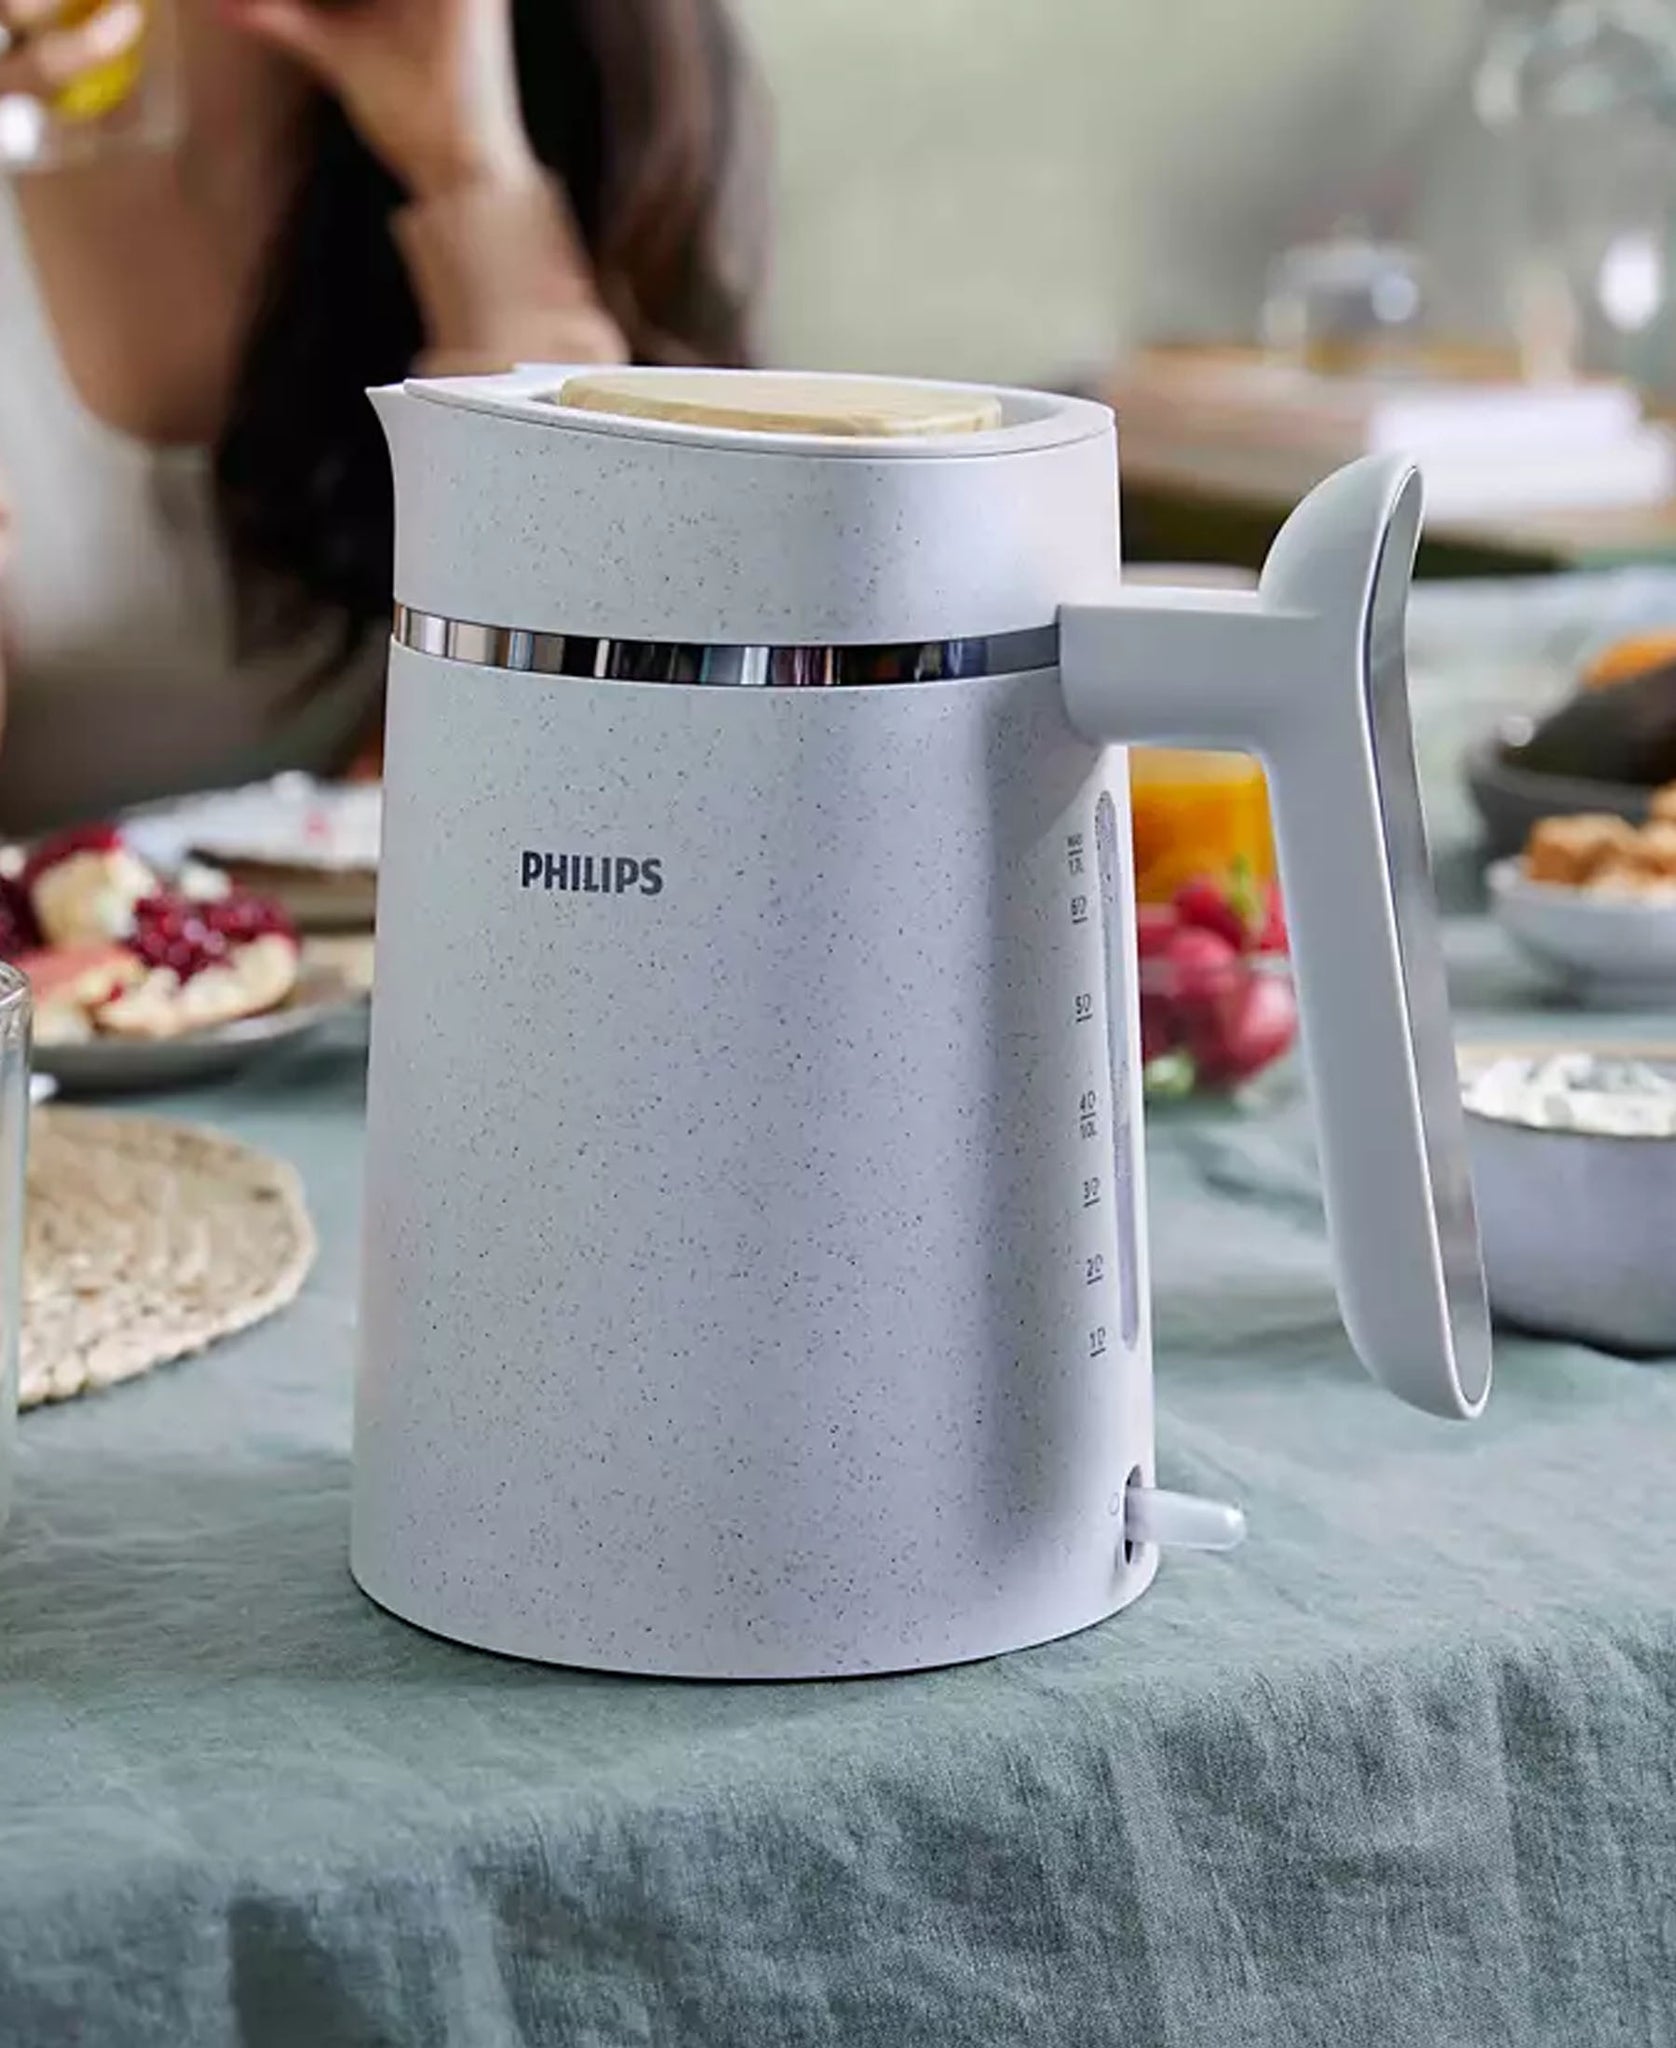 Philips Eco Conscious Edition 5000 Series Kettle - White